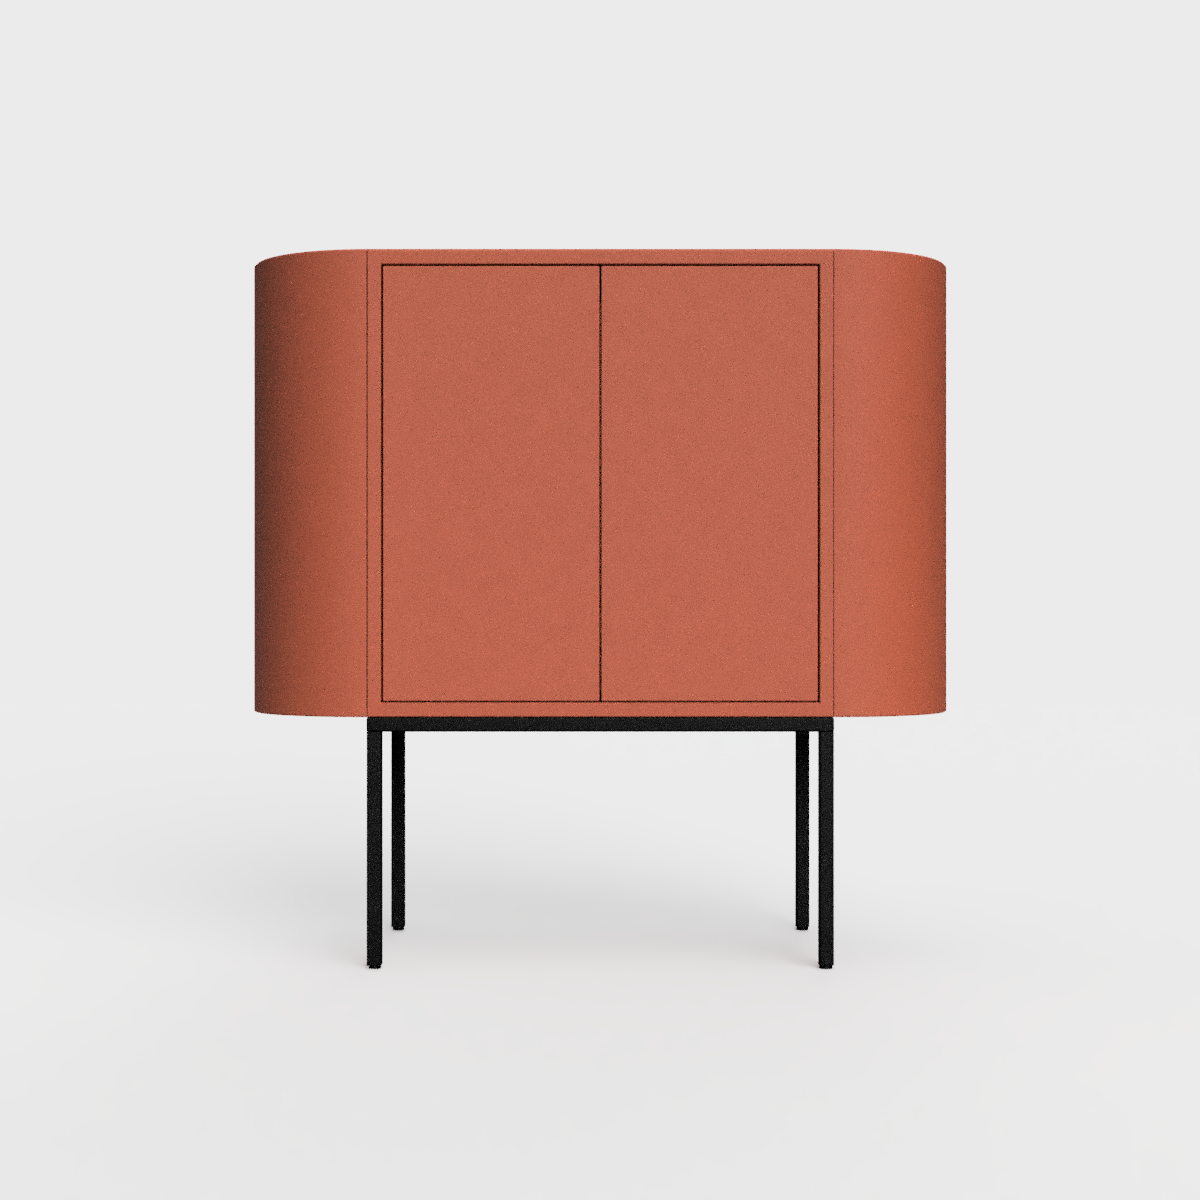 Siena 01 Sideboard in brick color, powder-coated steel, elegant and modern piece of furniture for your living room